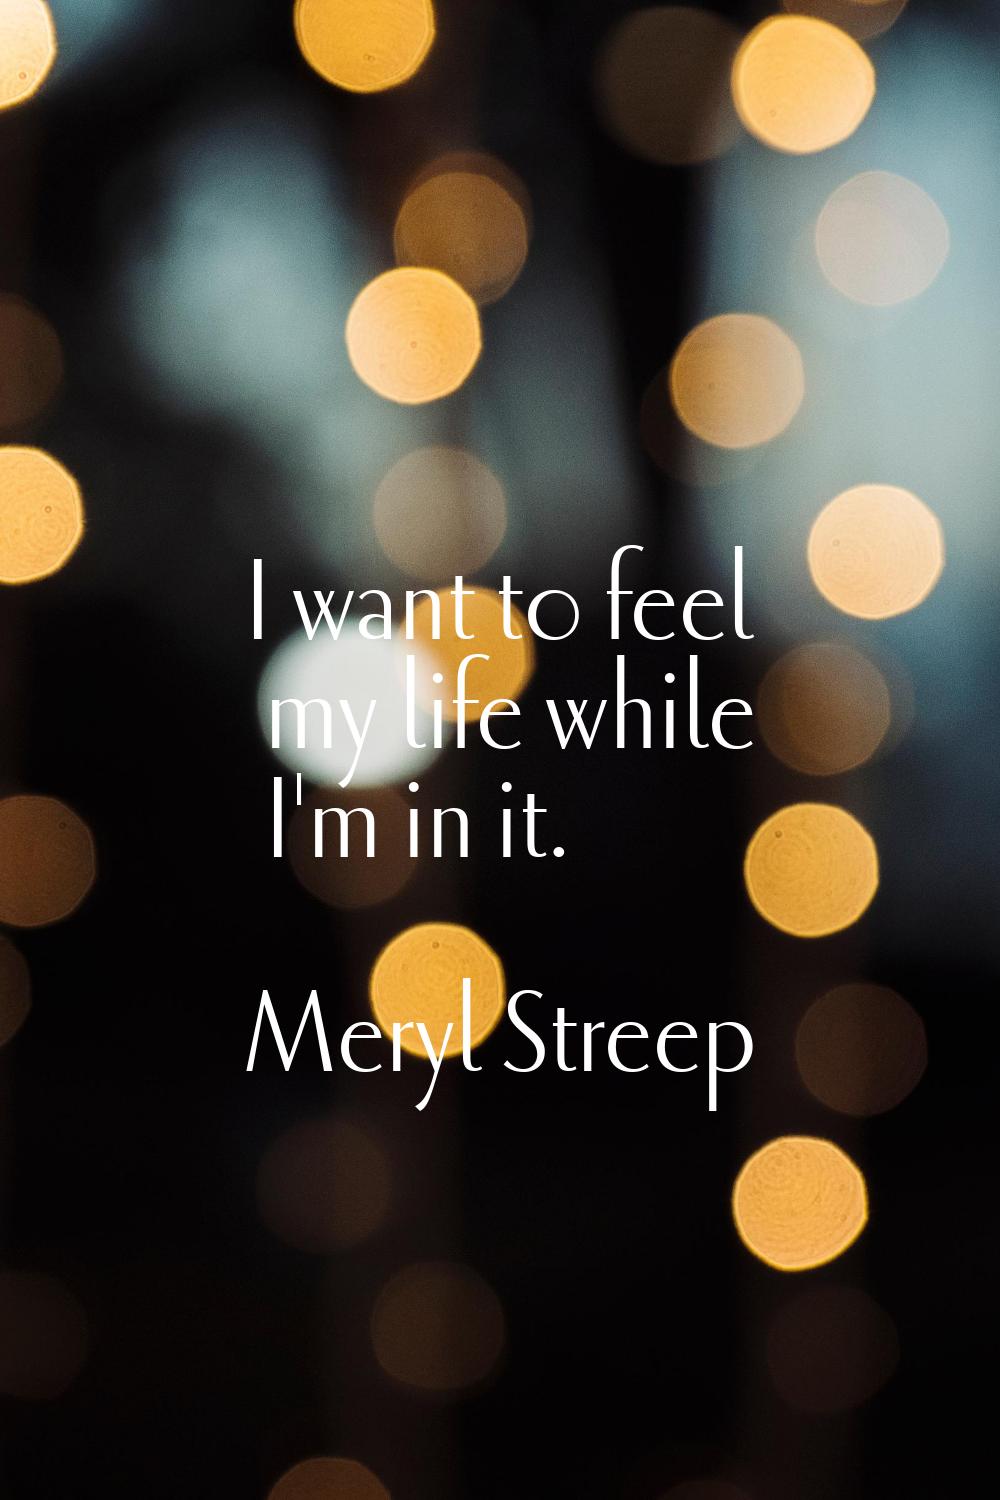 I want to feel my life while I'm in it.